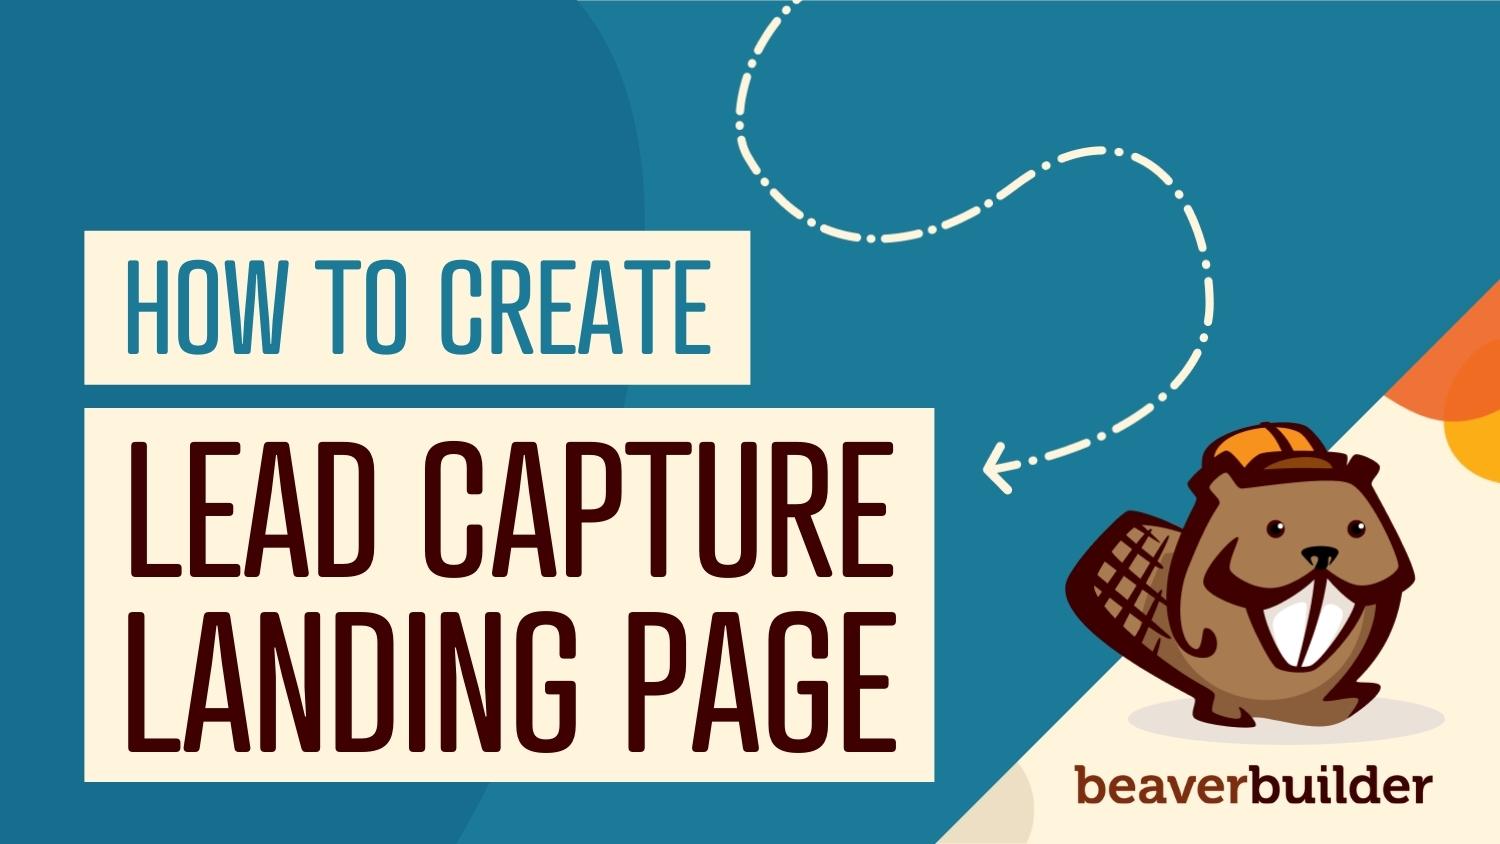 How to create a lead capture landing page using Beaver Builder